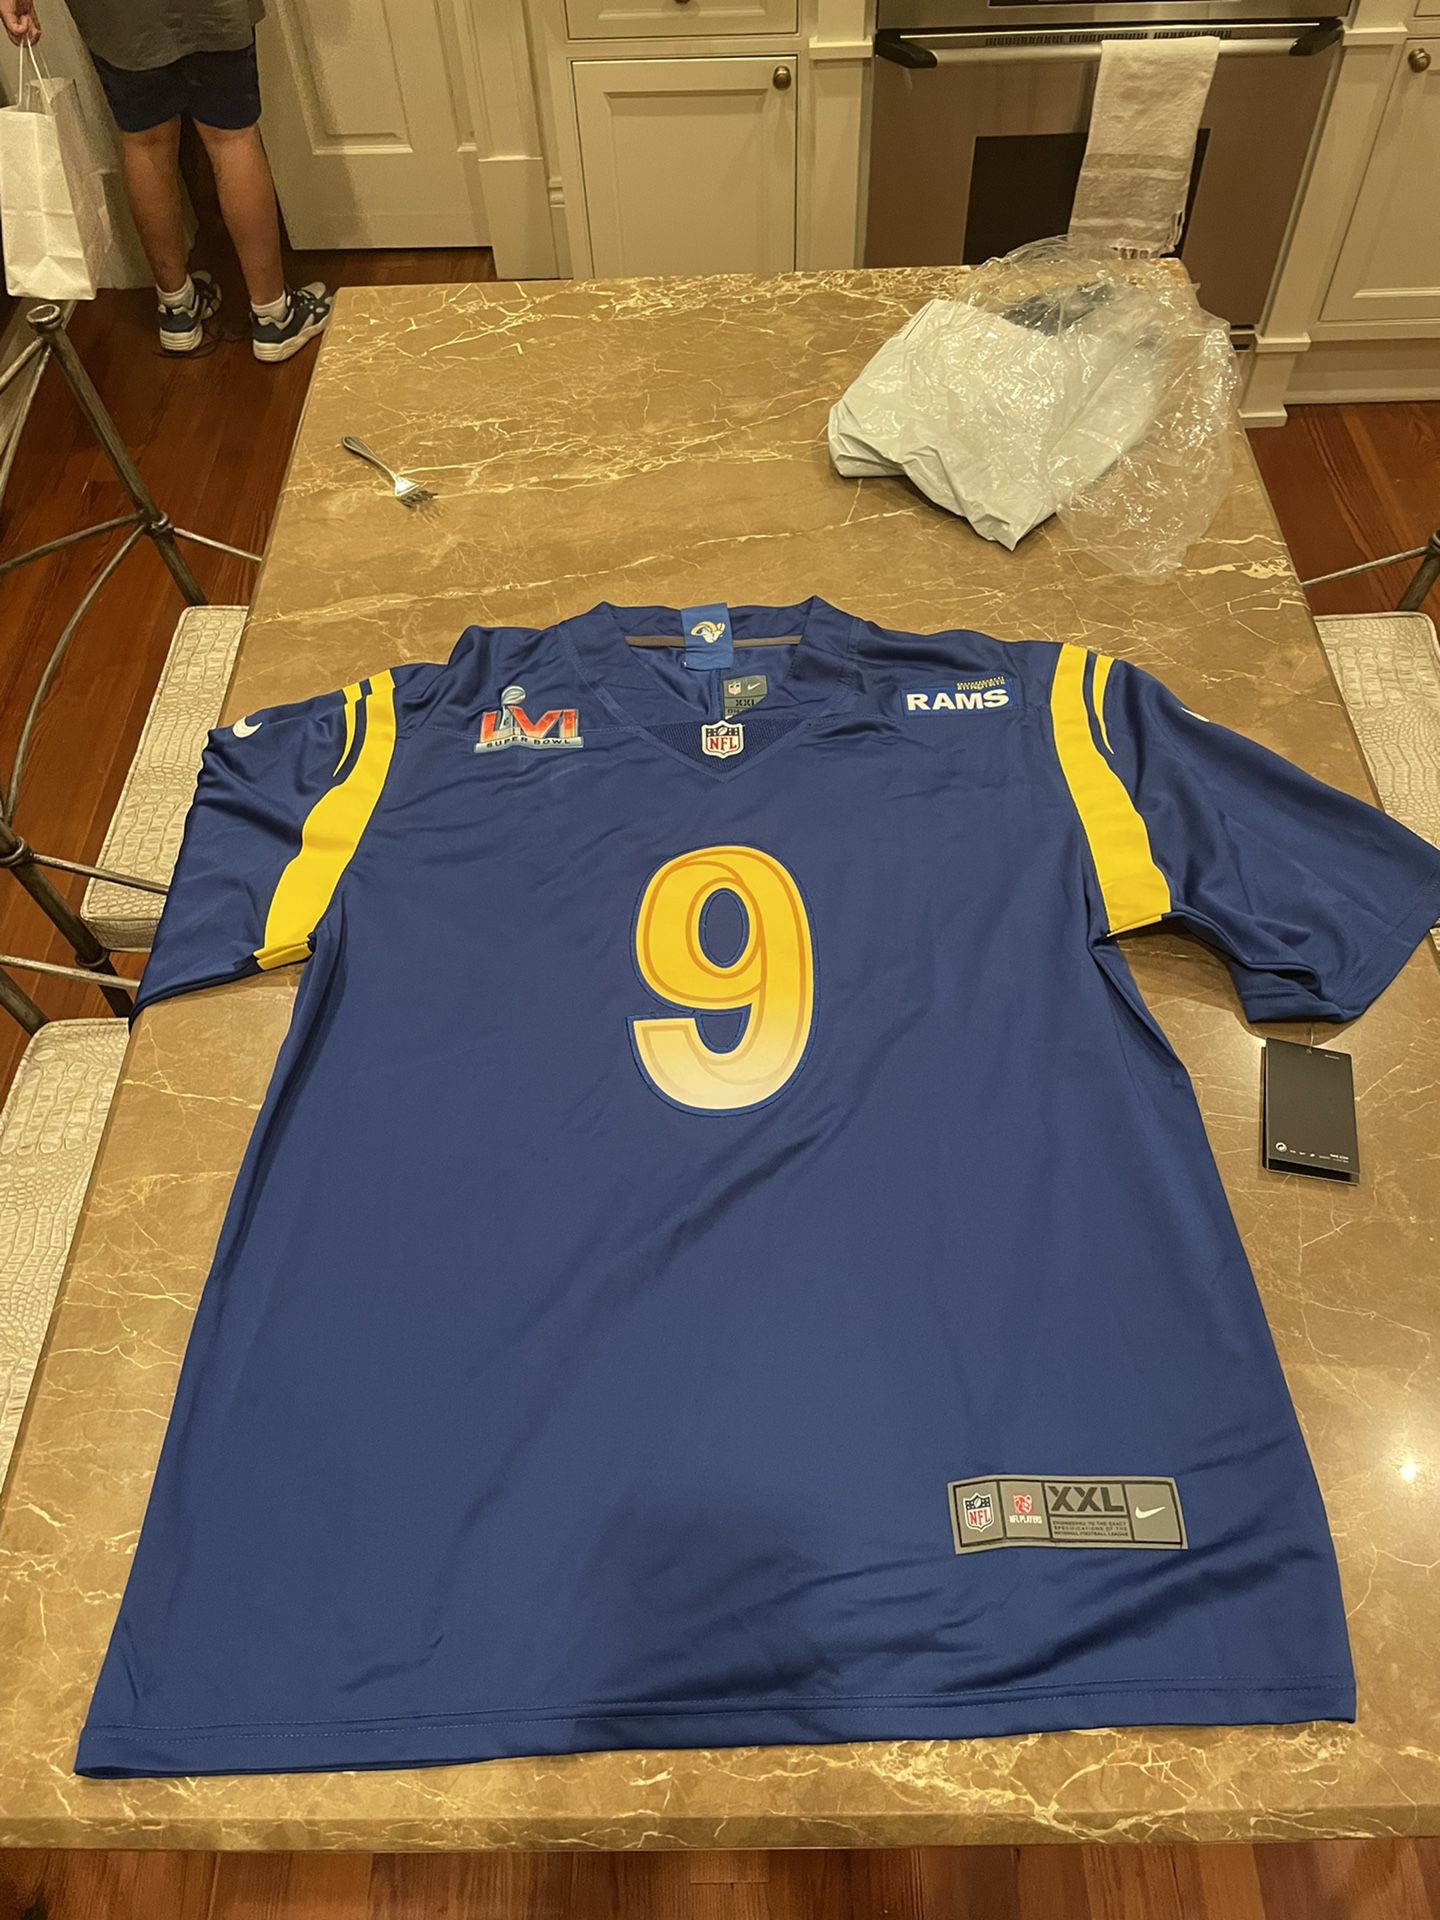 Matthew Stafford Jersey Never Used for Sale in Los Angeles, CA - OfferUp